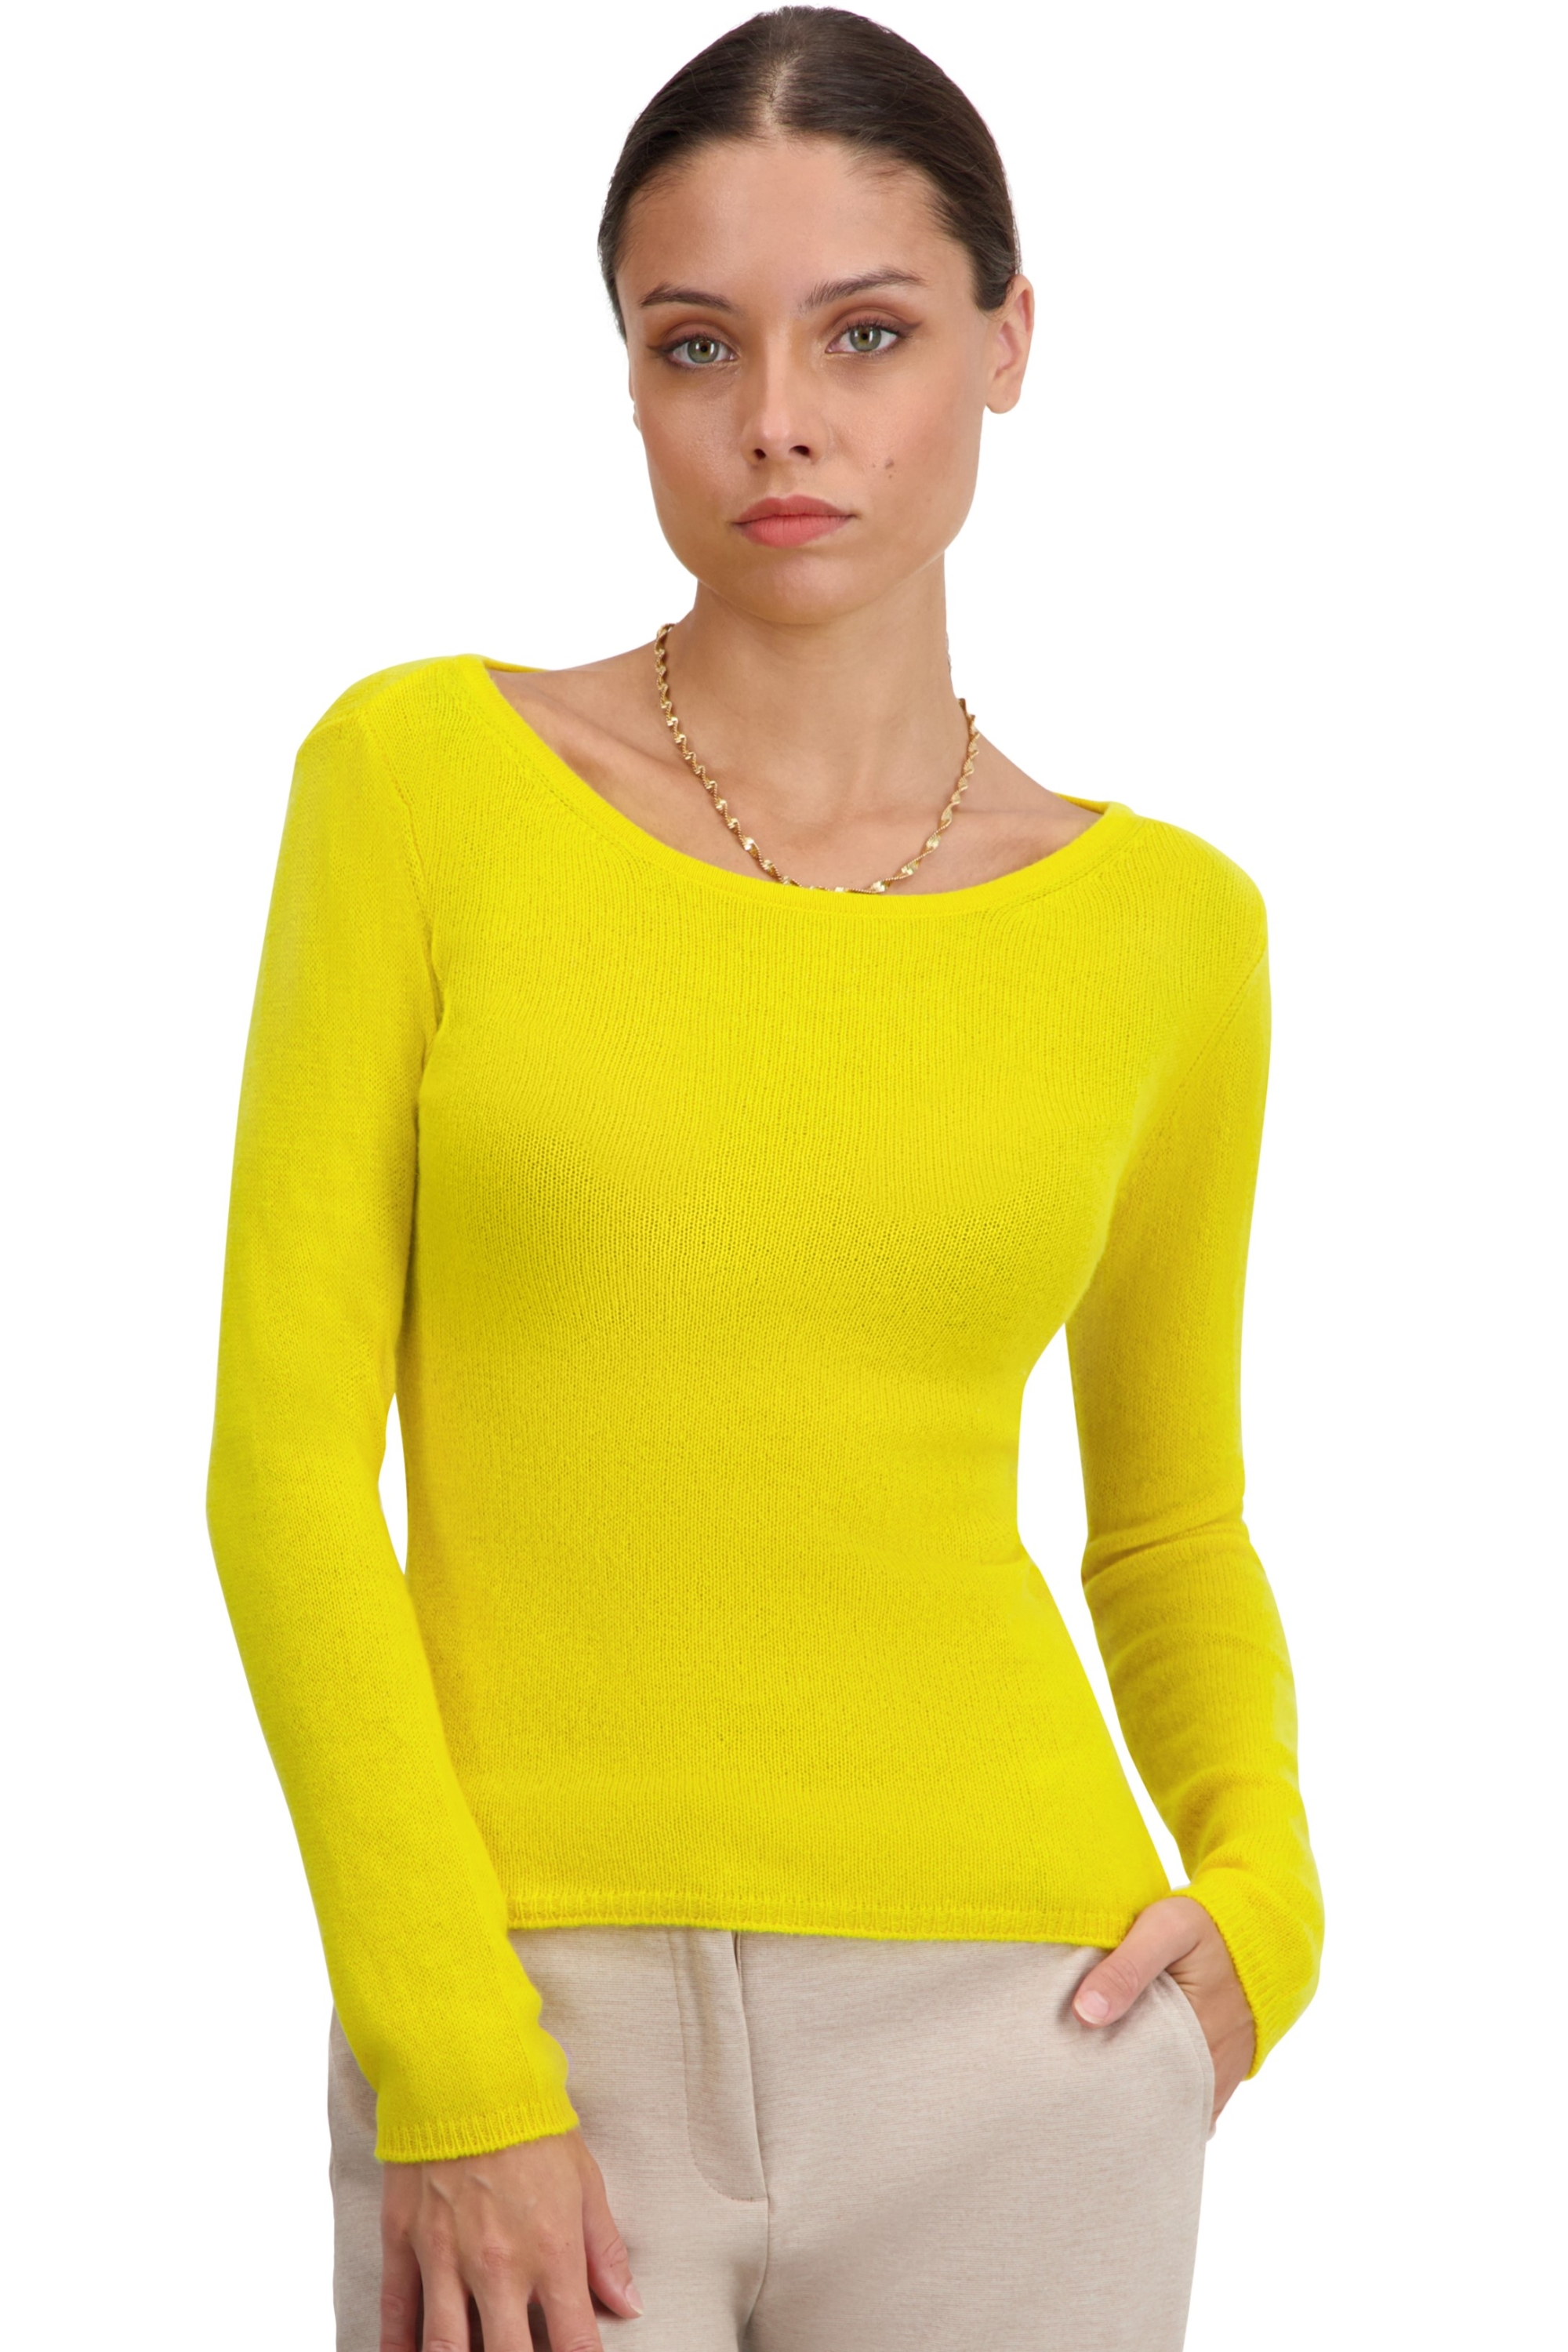 Cashmere ladies basic sweaters at low prices caleen cyber yellow xl